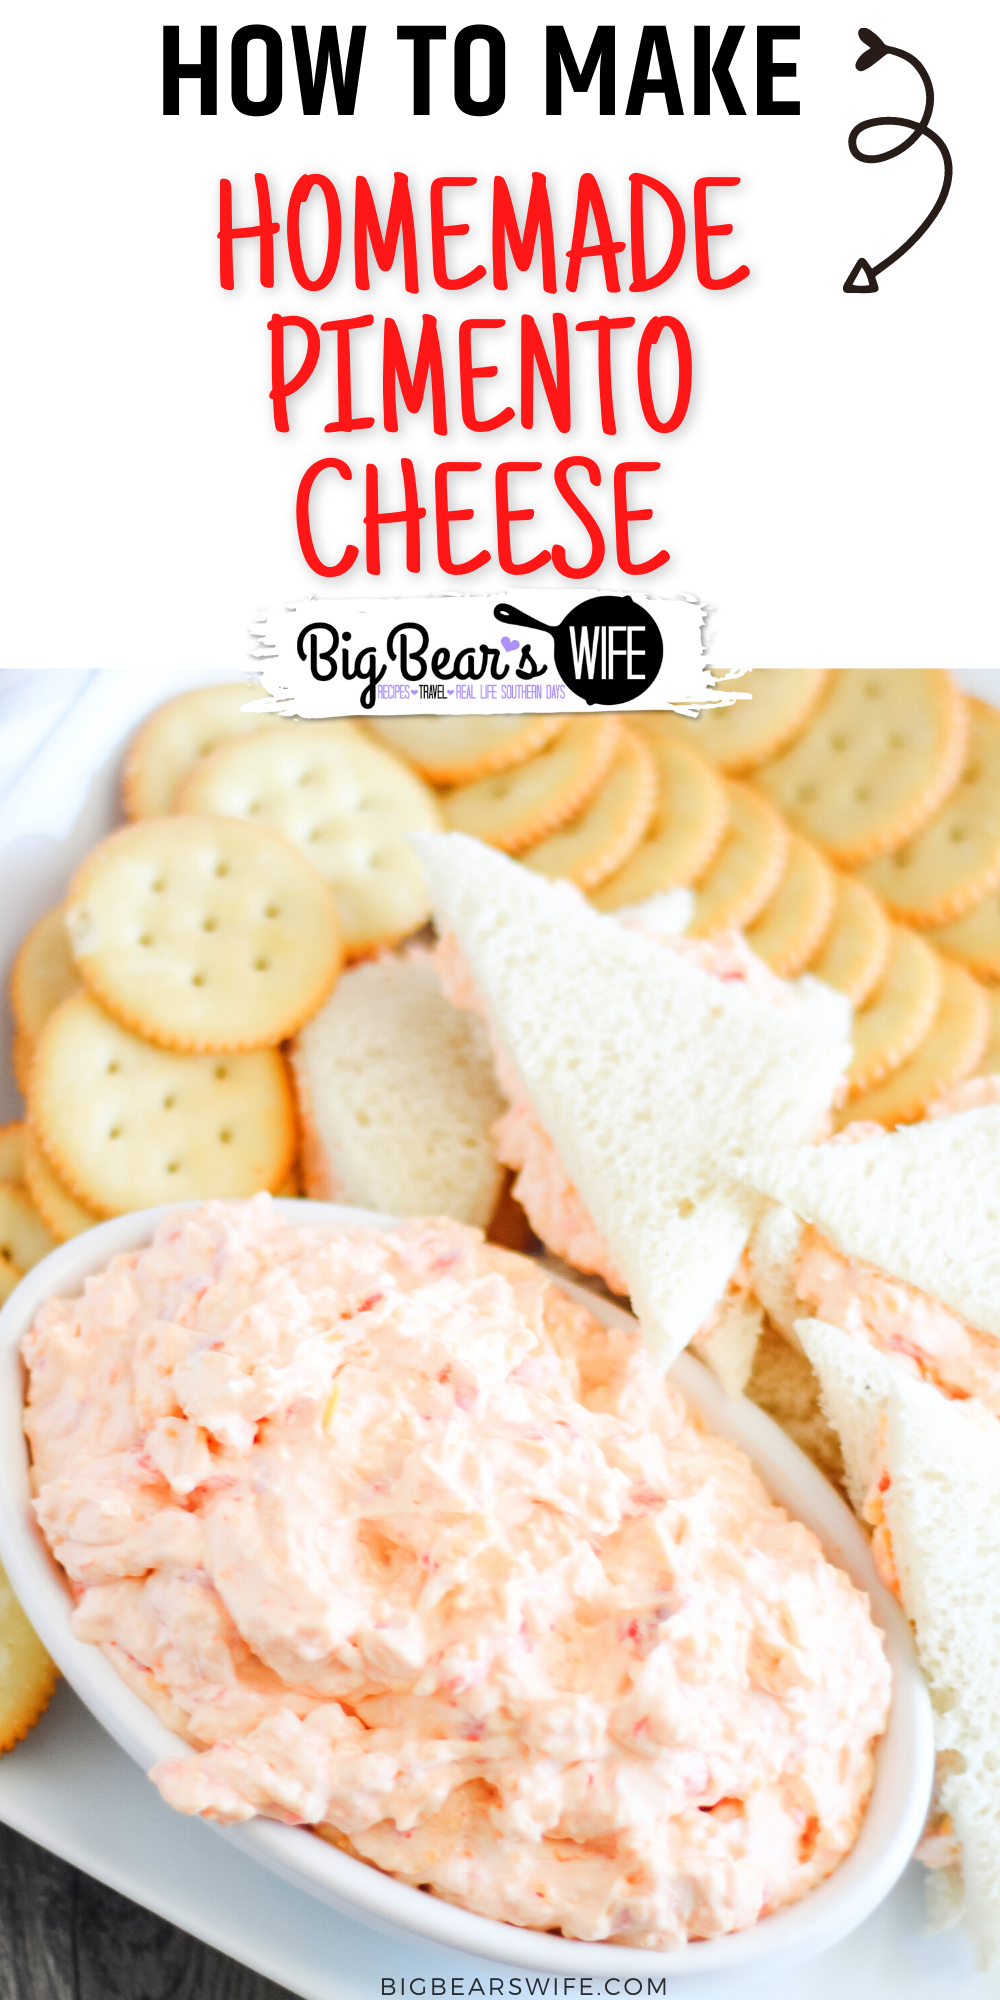 Homemade Southern Pimento Cheese is super easy to make at home! This recipe is a combination of a recipe from my grandmother's recipe box and my own twist. It's our favorite pimento cheese recipe! 

Homemade Southern Pimento Cheese is super easy to make at home! This recipe is a combination of a recipe from my grandmother's recipe box and my own twist. It's our favorite pimento cheese recipe!  via @bigbearswife